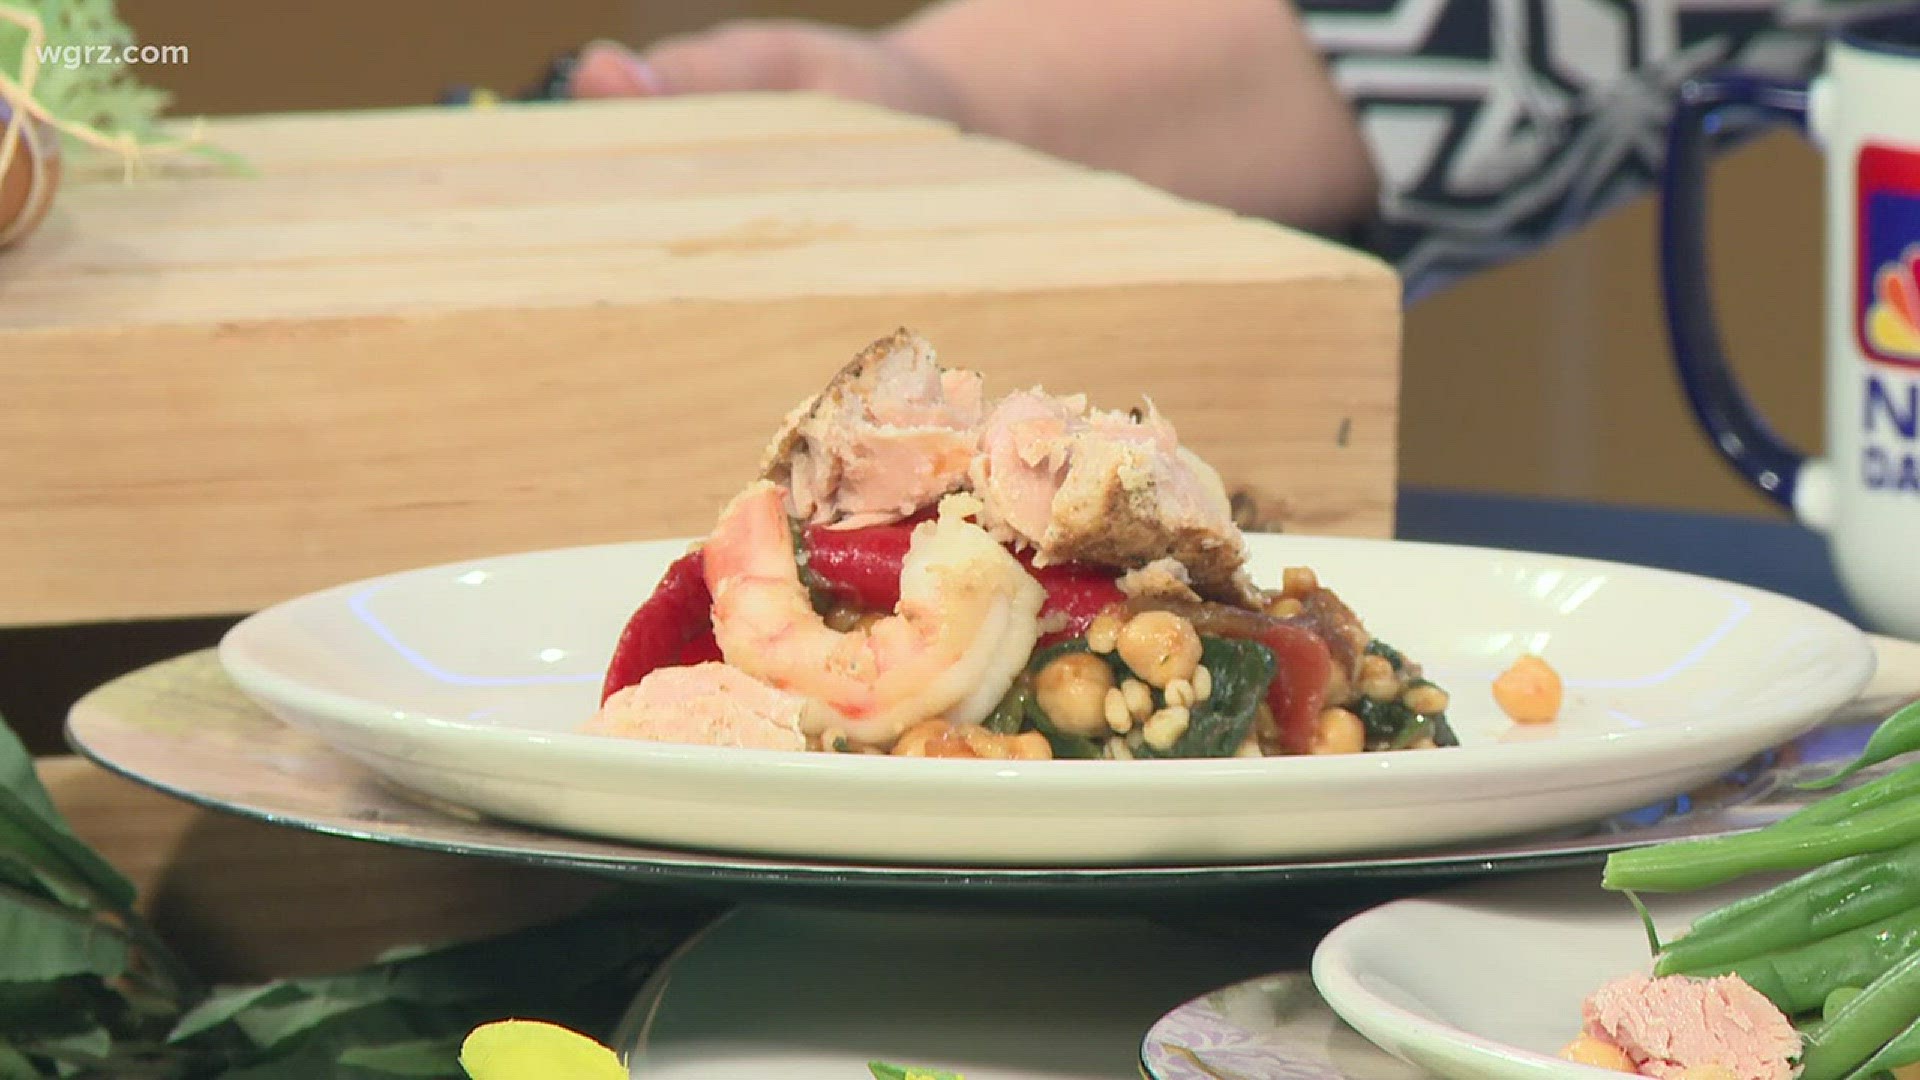 Chef Binks stopped by Daybreak to show some meat-free recipes during the Lent season.